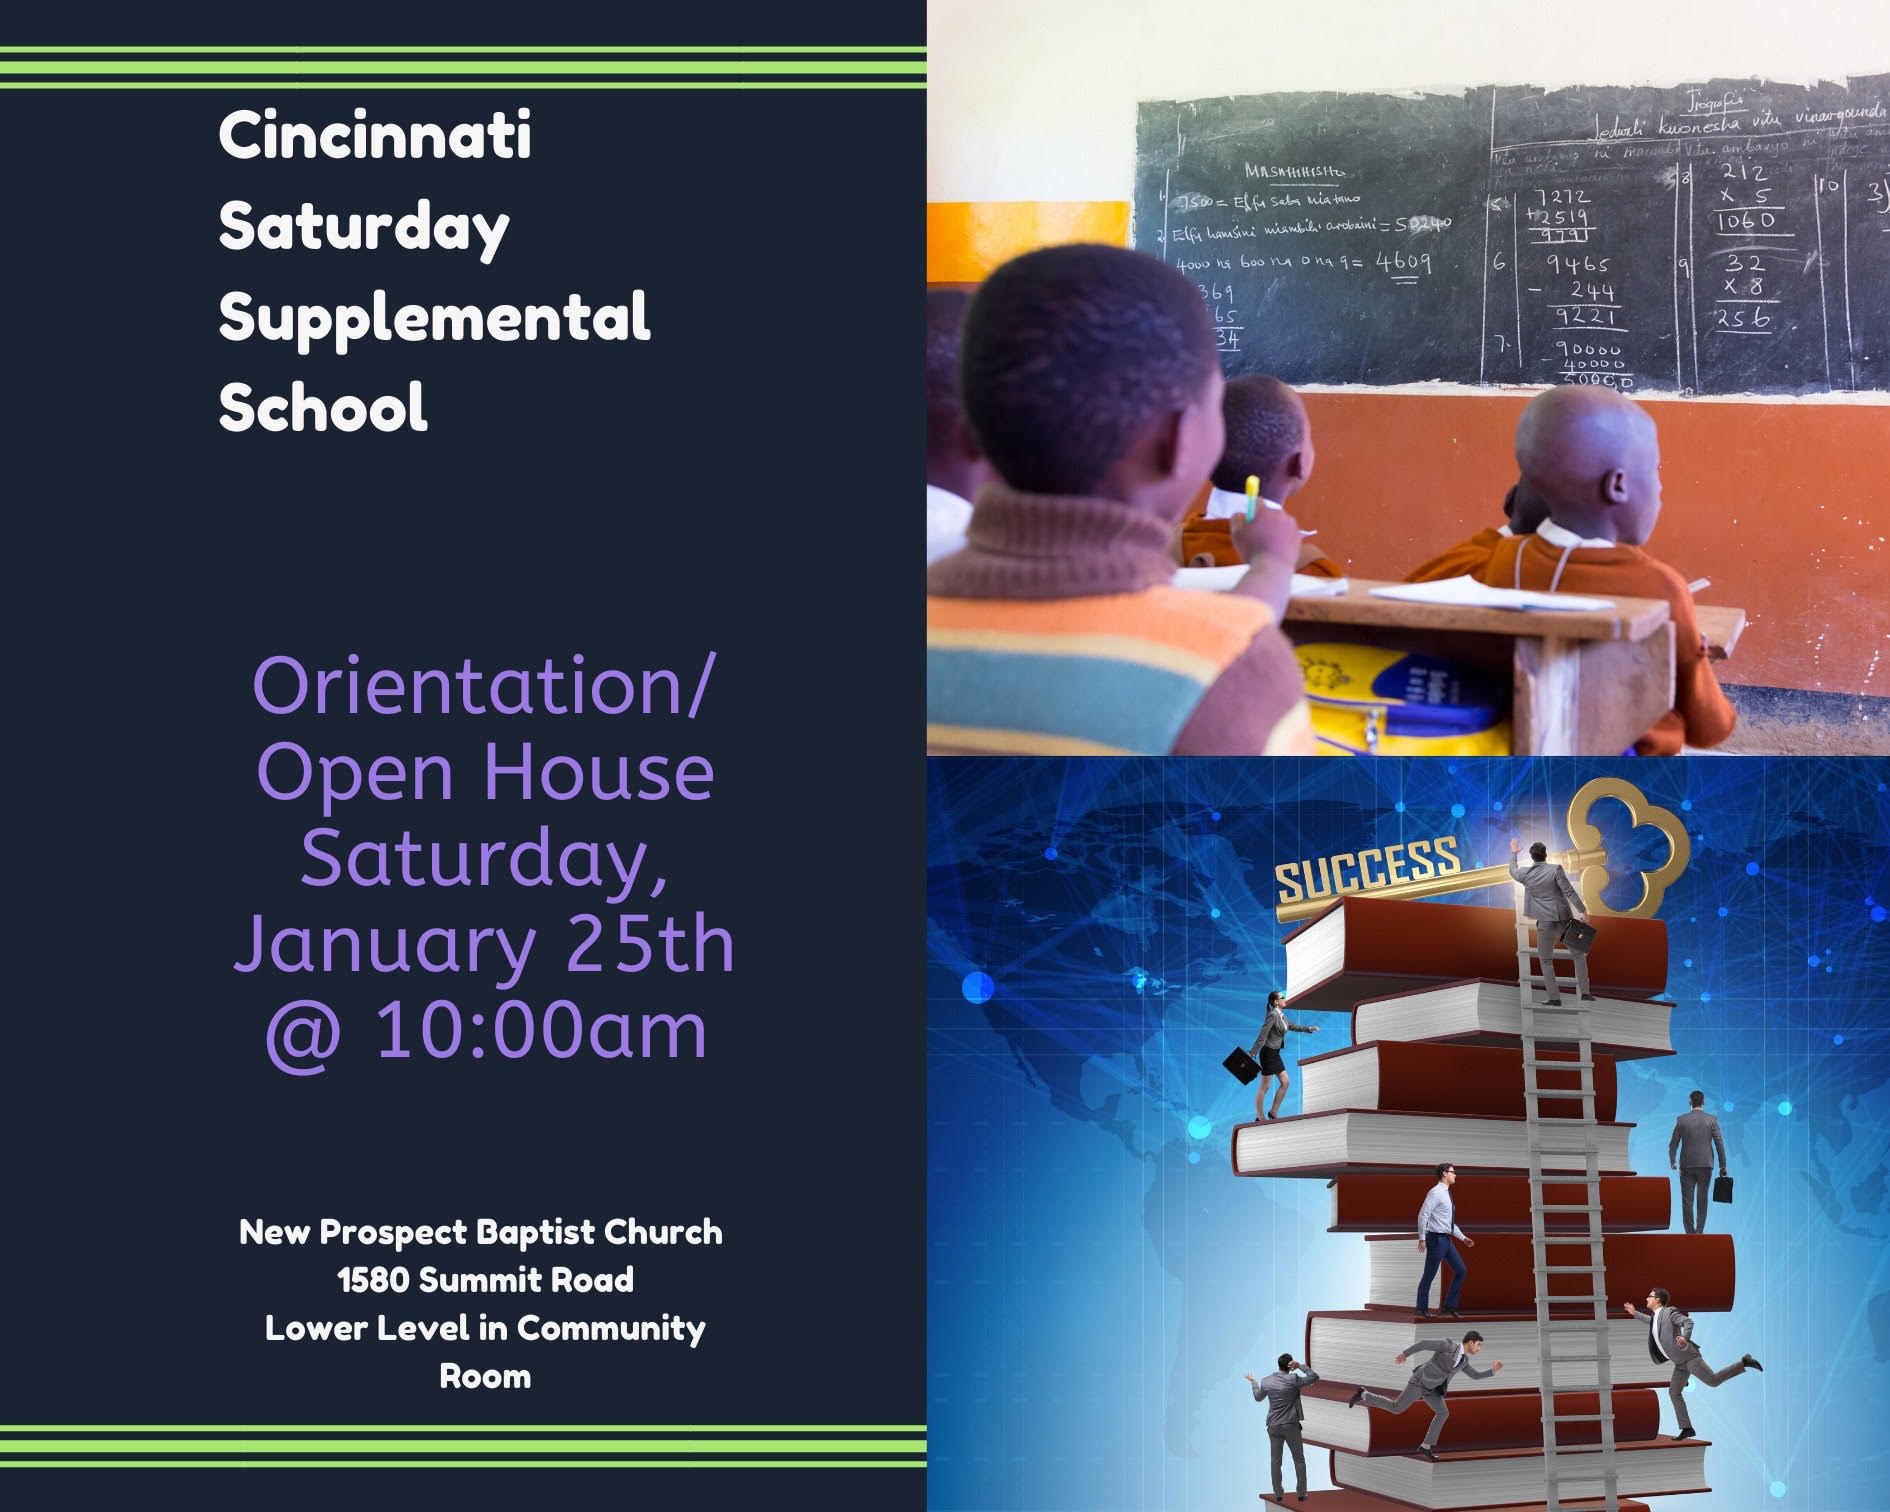 Cincinnati Saturday Supplemental School Orientation and Open House on Saturday January 25th 10 a.m. at New Prospect